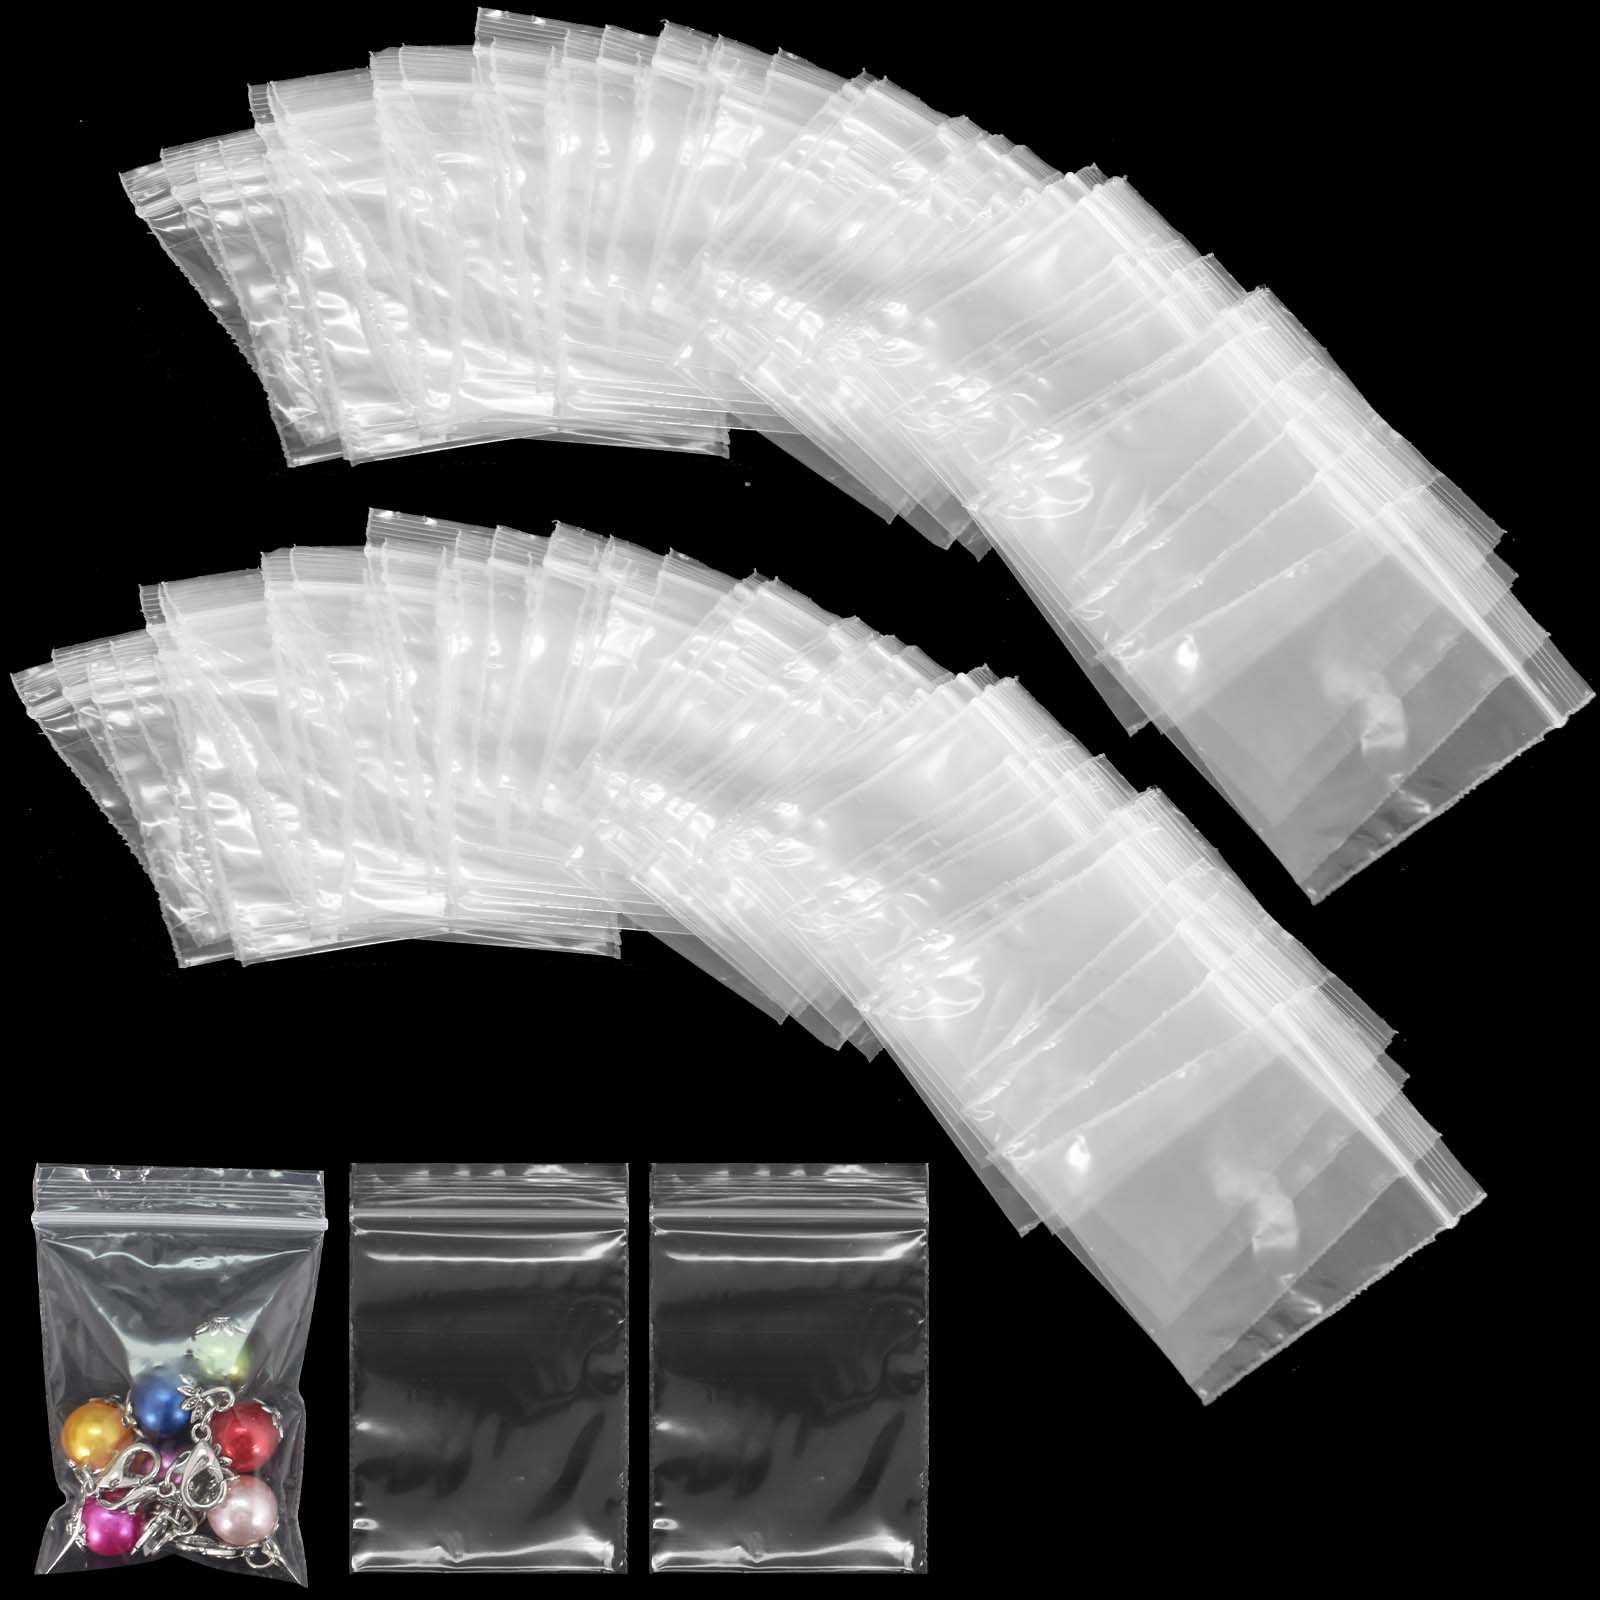  500pcs 2 X 2 Inch Small Plastic Bags Little Baggies Clear  Resealable Zip Poly Bags 2 Mil For Jewerly Snack Vitamins Pill Coin Beads